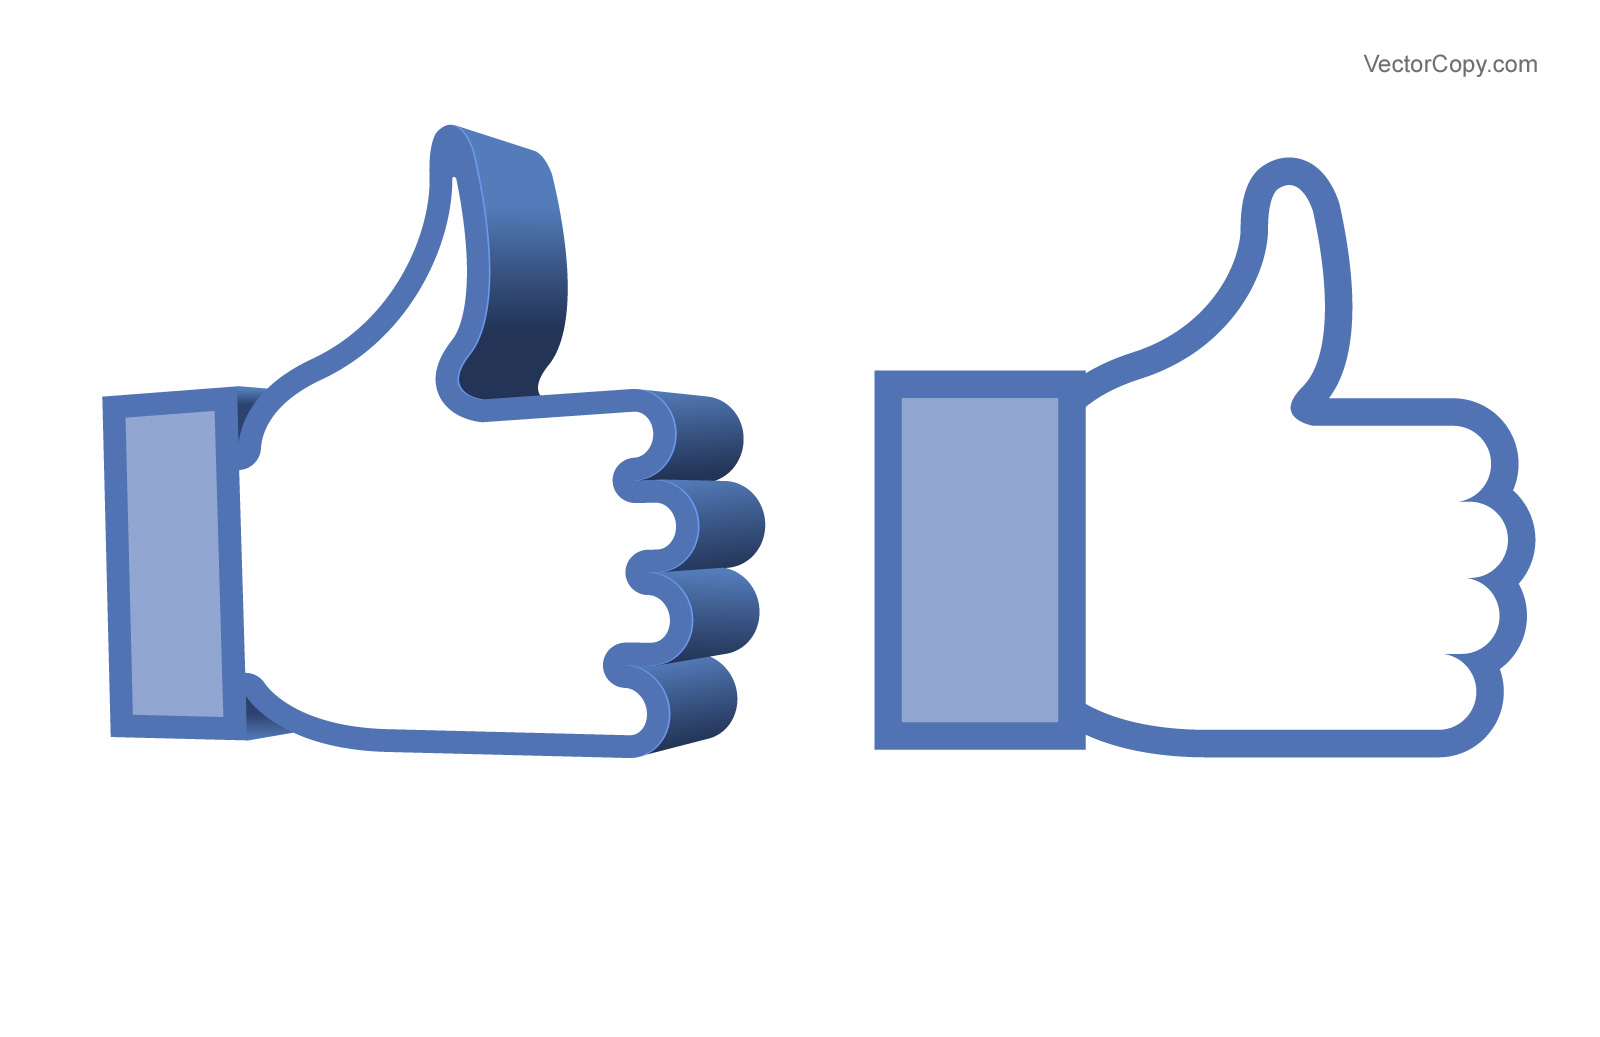 Clipart logo thumbs up